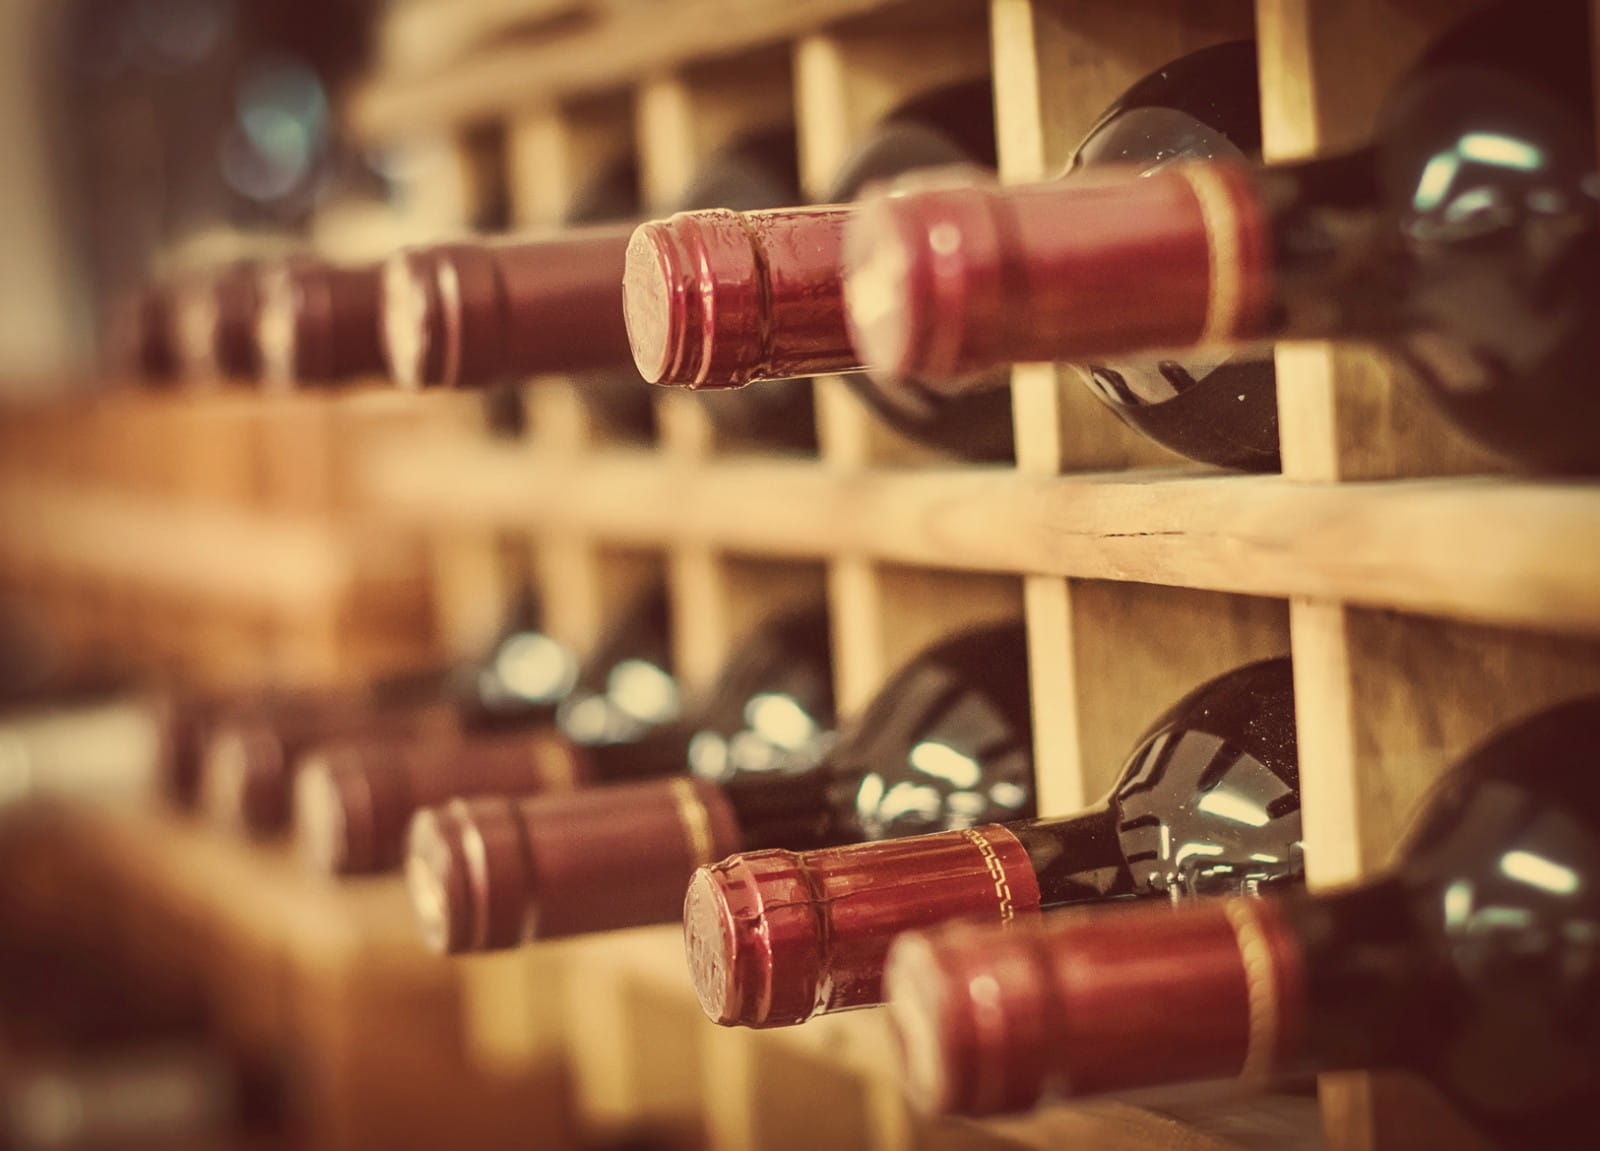 How to create a modest wine cellar on a budget